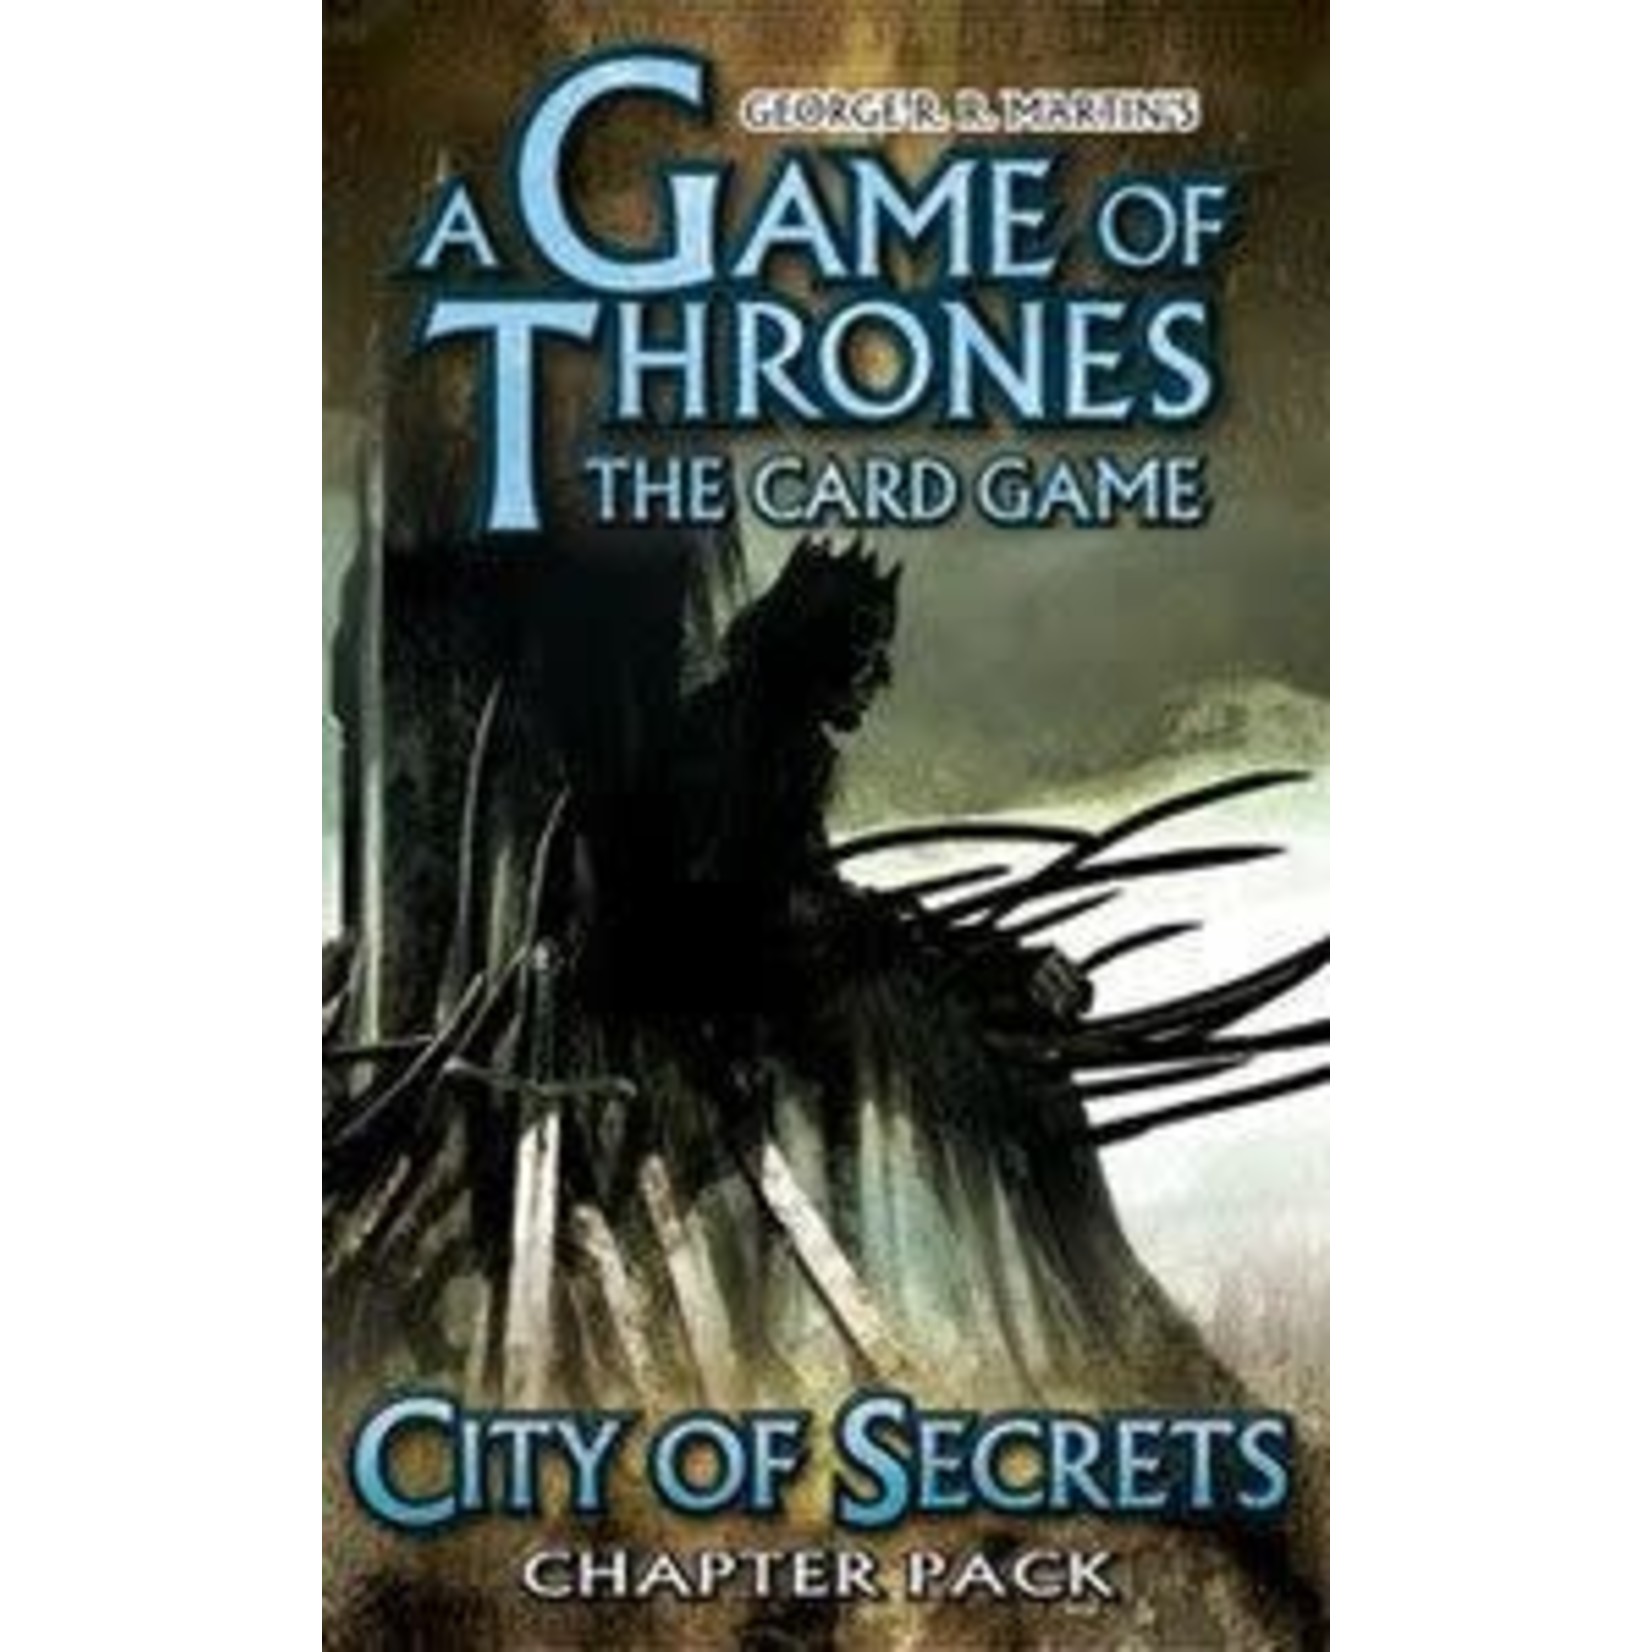 Game of Thrones LCG City of Secrets Chapter Pack